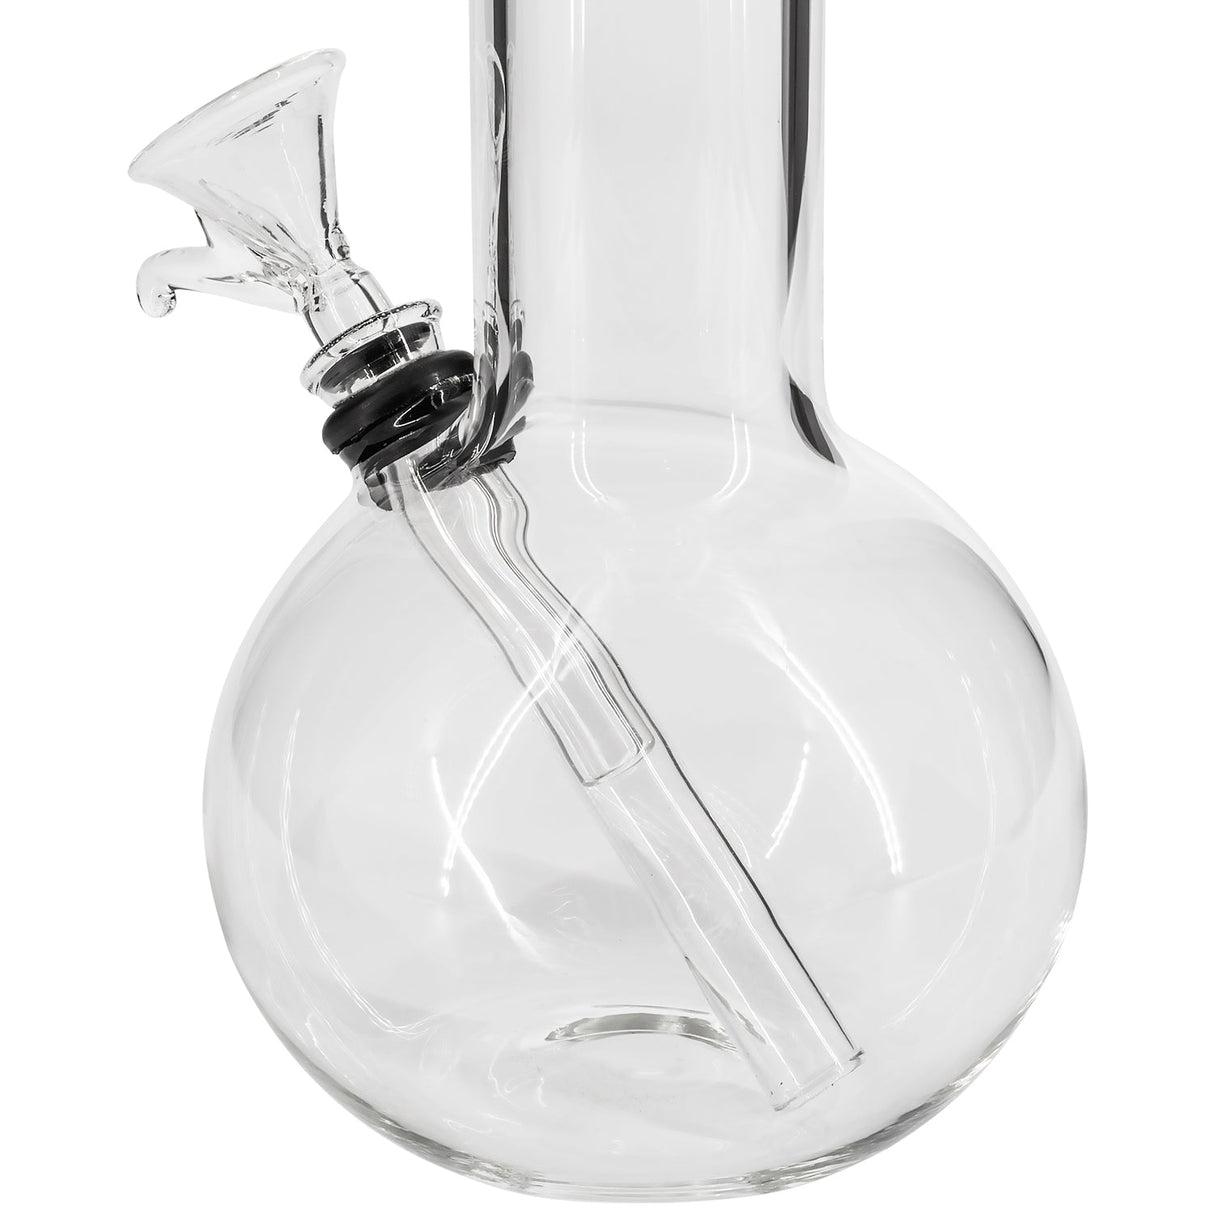 LA Pipes Clear Glass Basic Water Pipe with Bubble Design and Grommet Joint